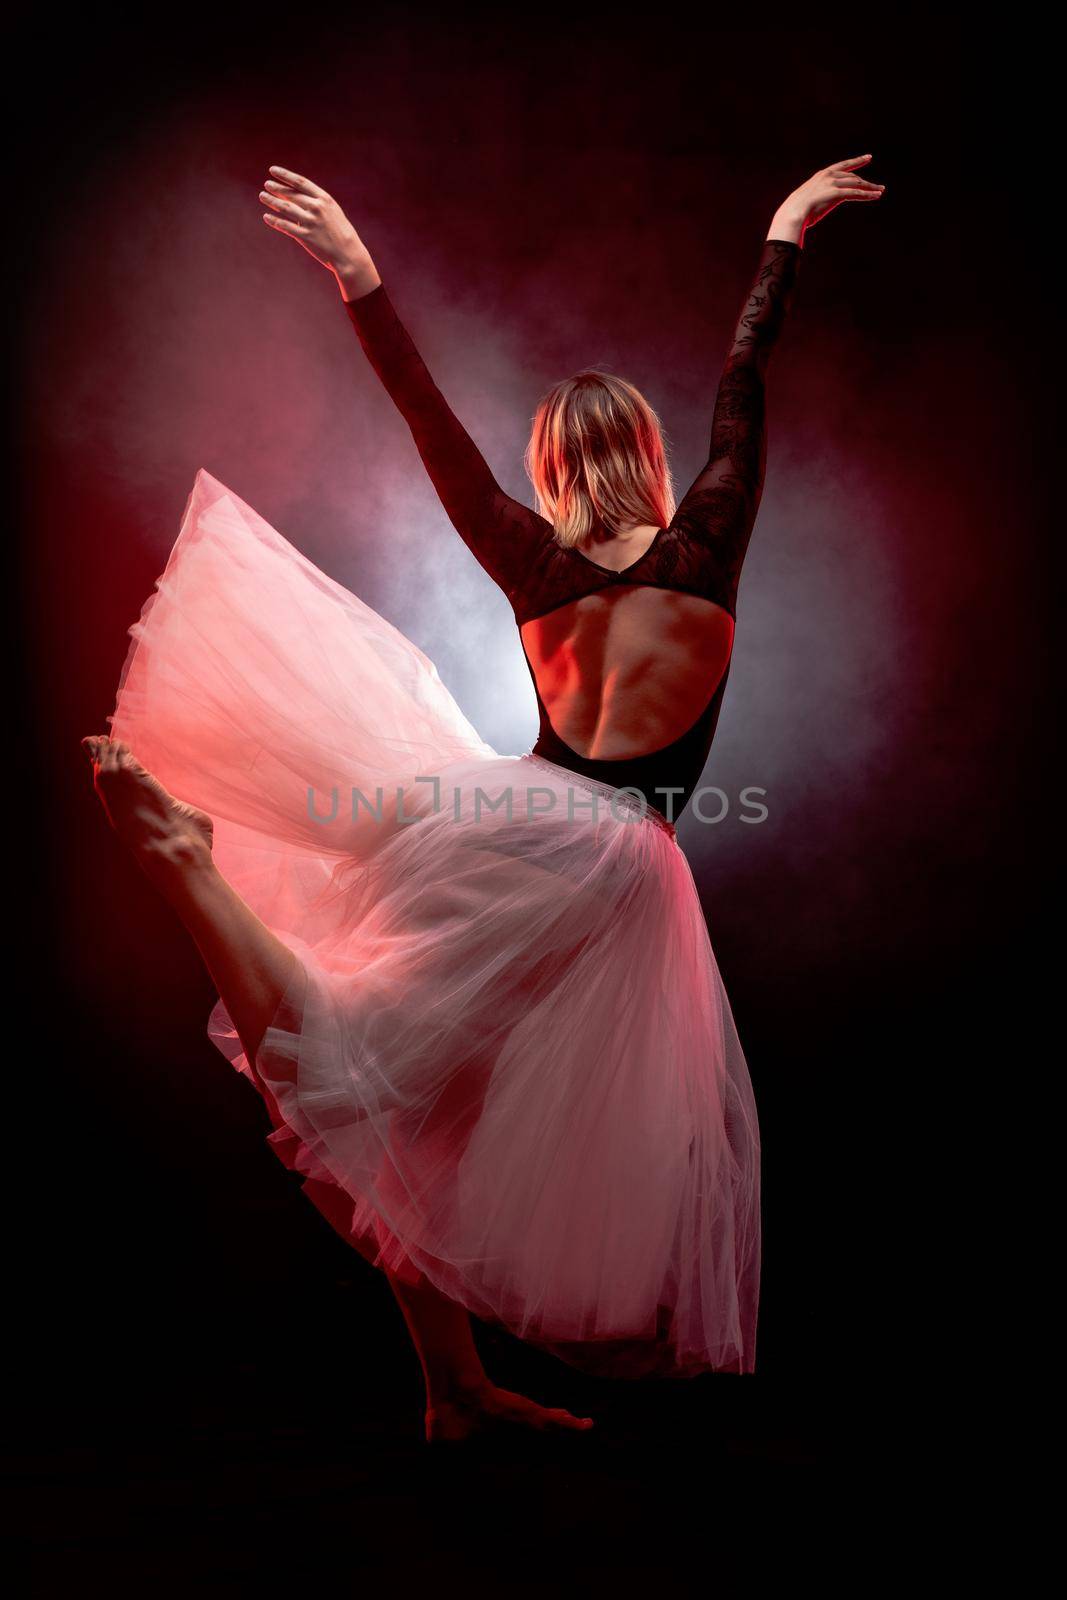 ballerina with a white dress and black top posing on red smoke background.